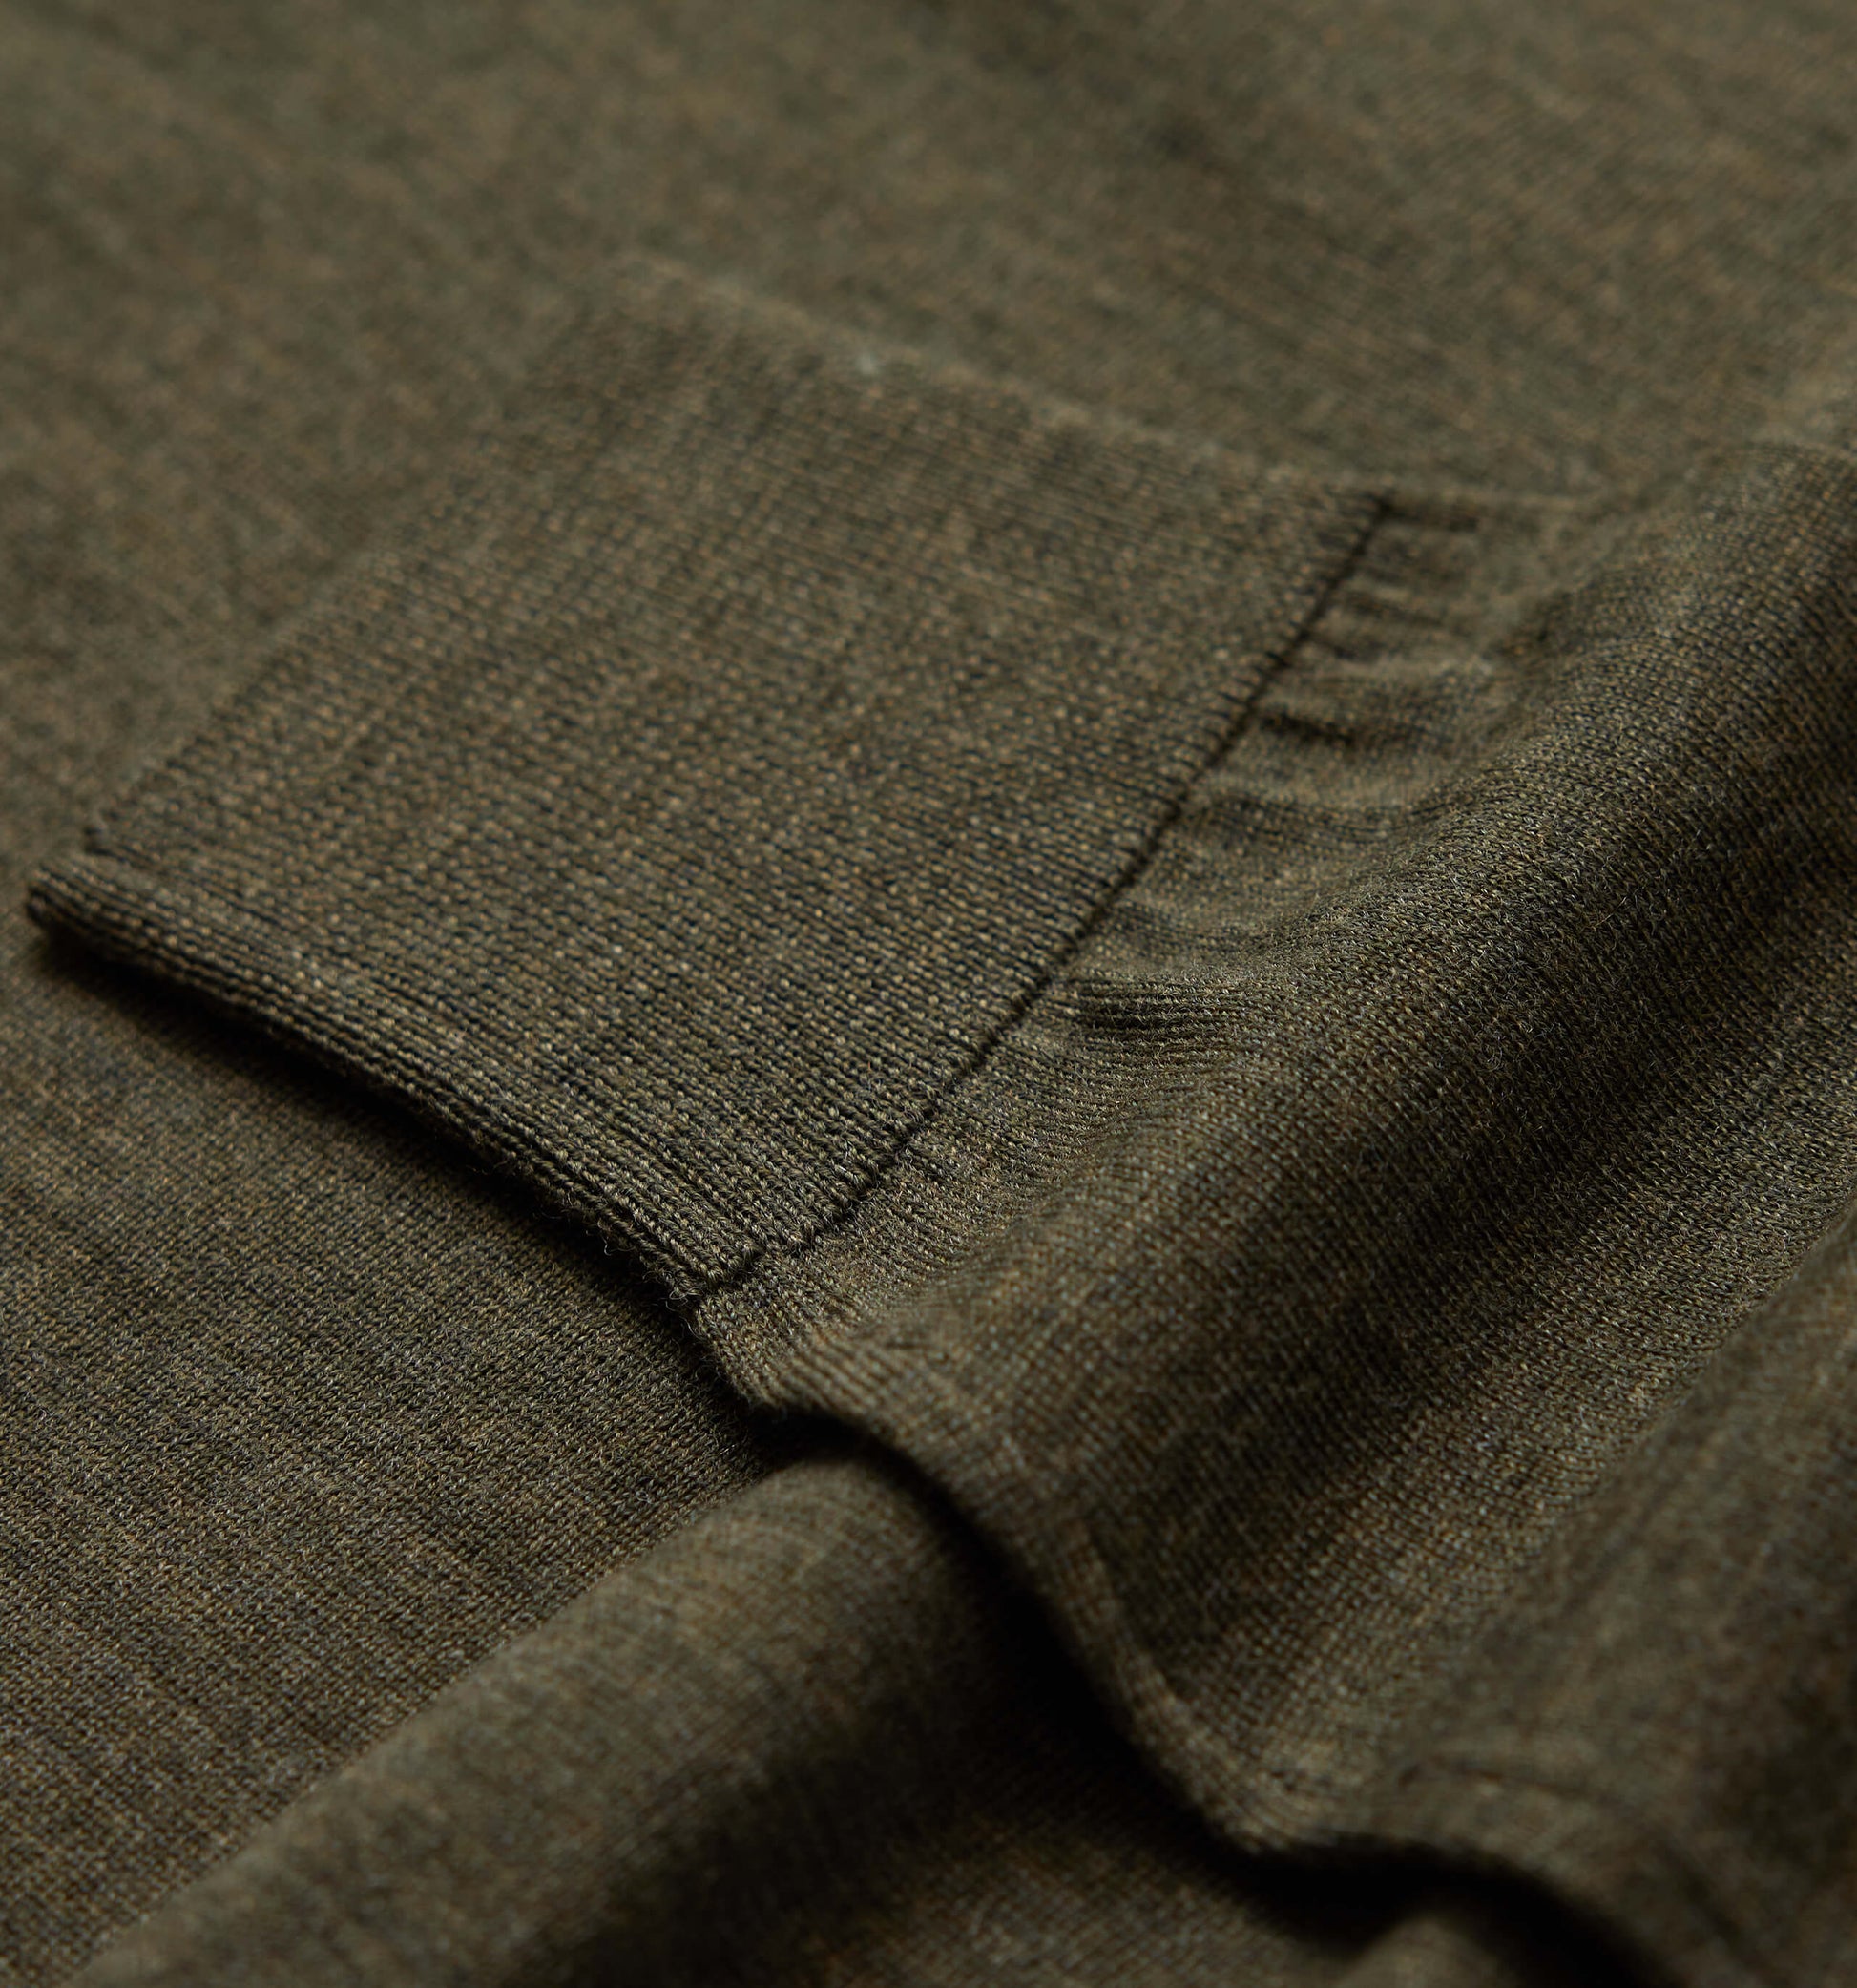 The Michael - Merino Wool Zip Mock In Army From King Essentials